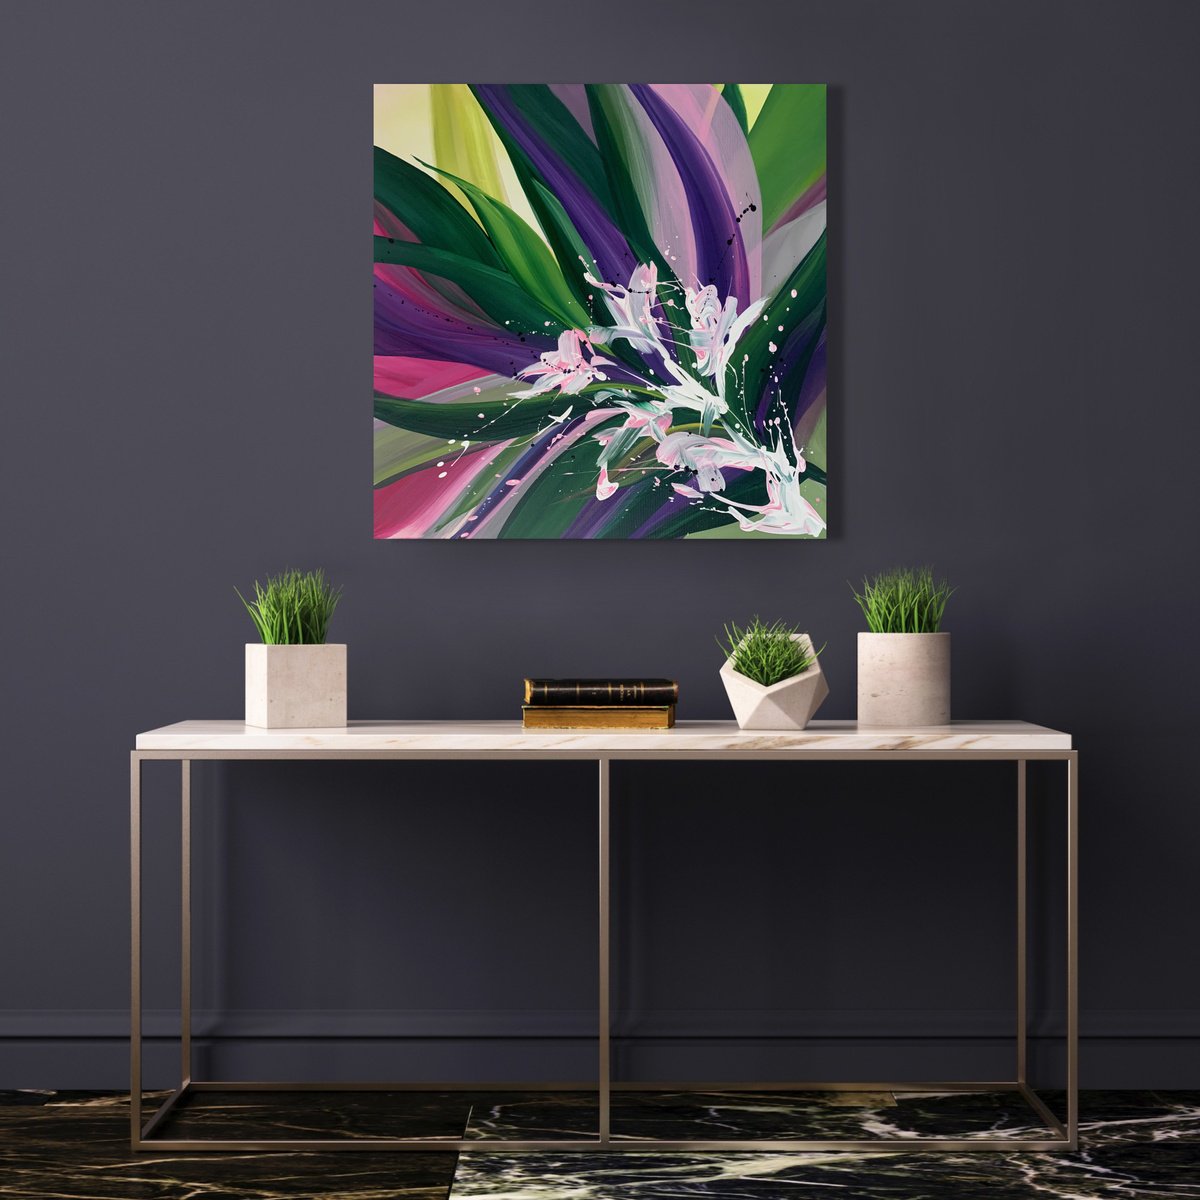 Exotic Botanical - Abstract Jungles. Leaves. Violet green tones. Abstract style. by Marina Skromova